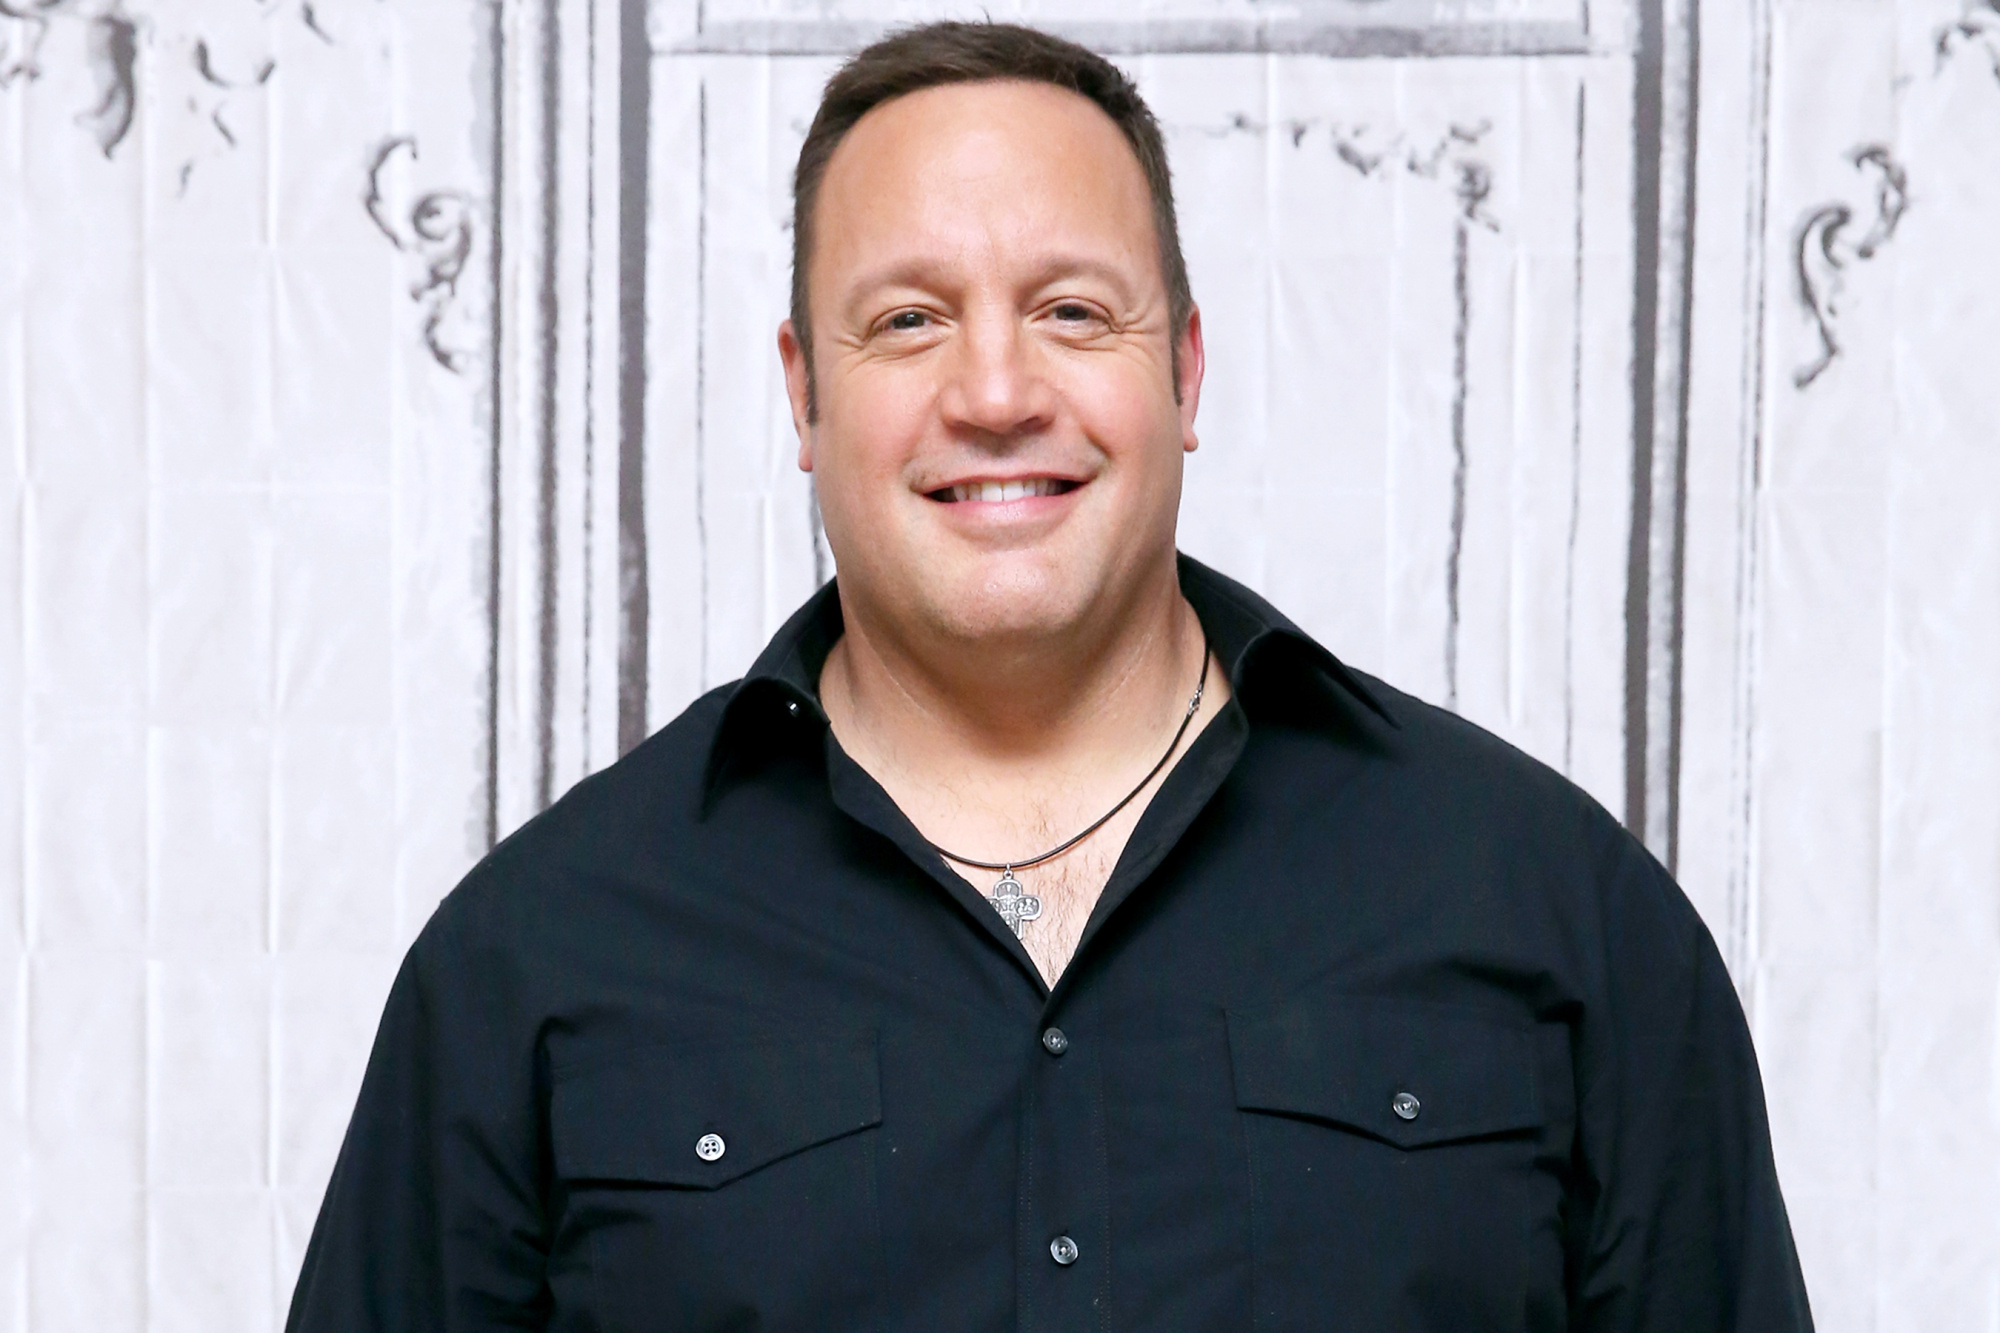 Kevin James Net Worth, Salary, and Nationality